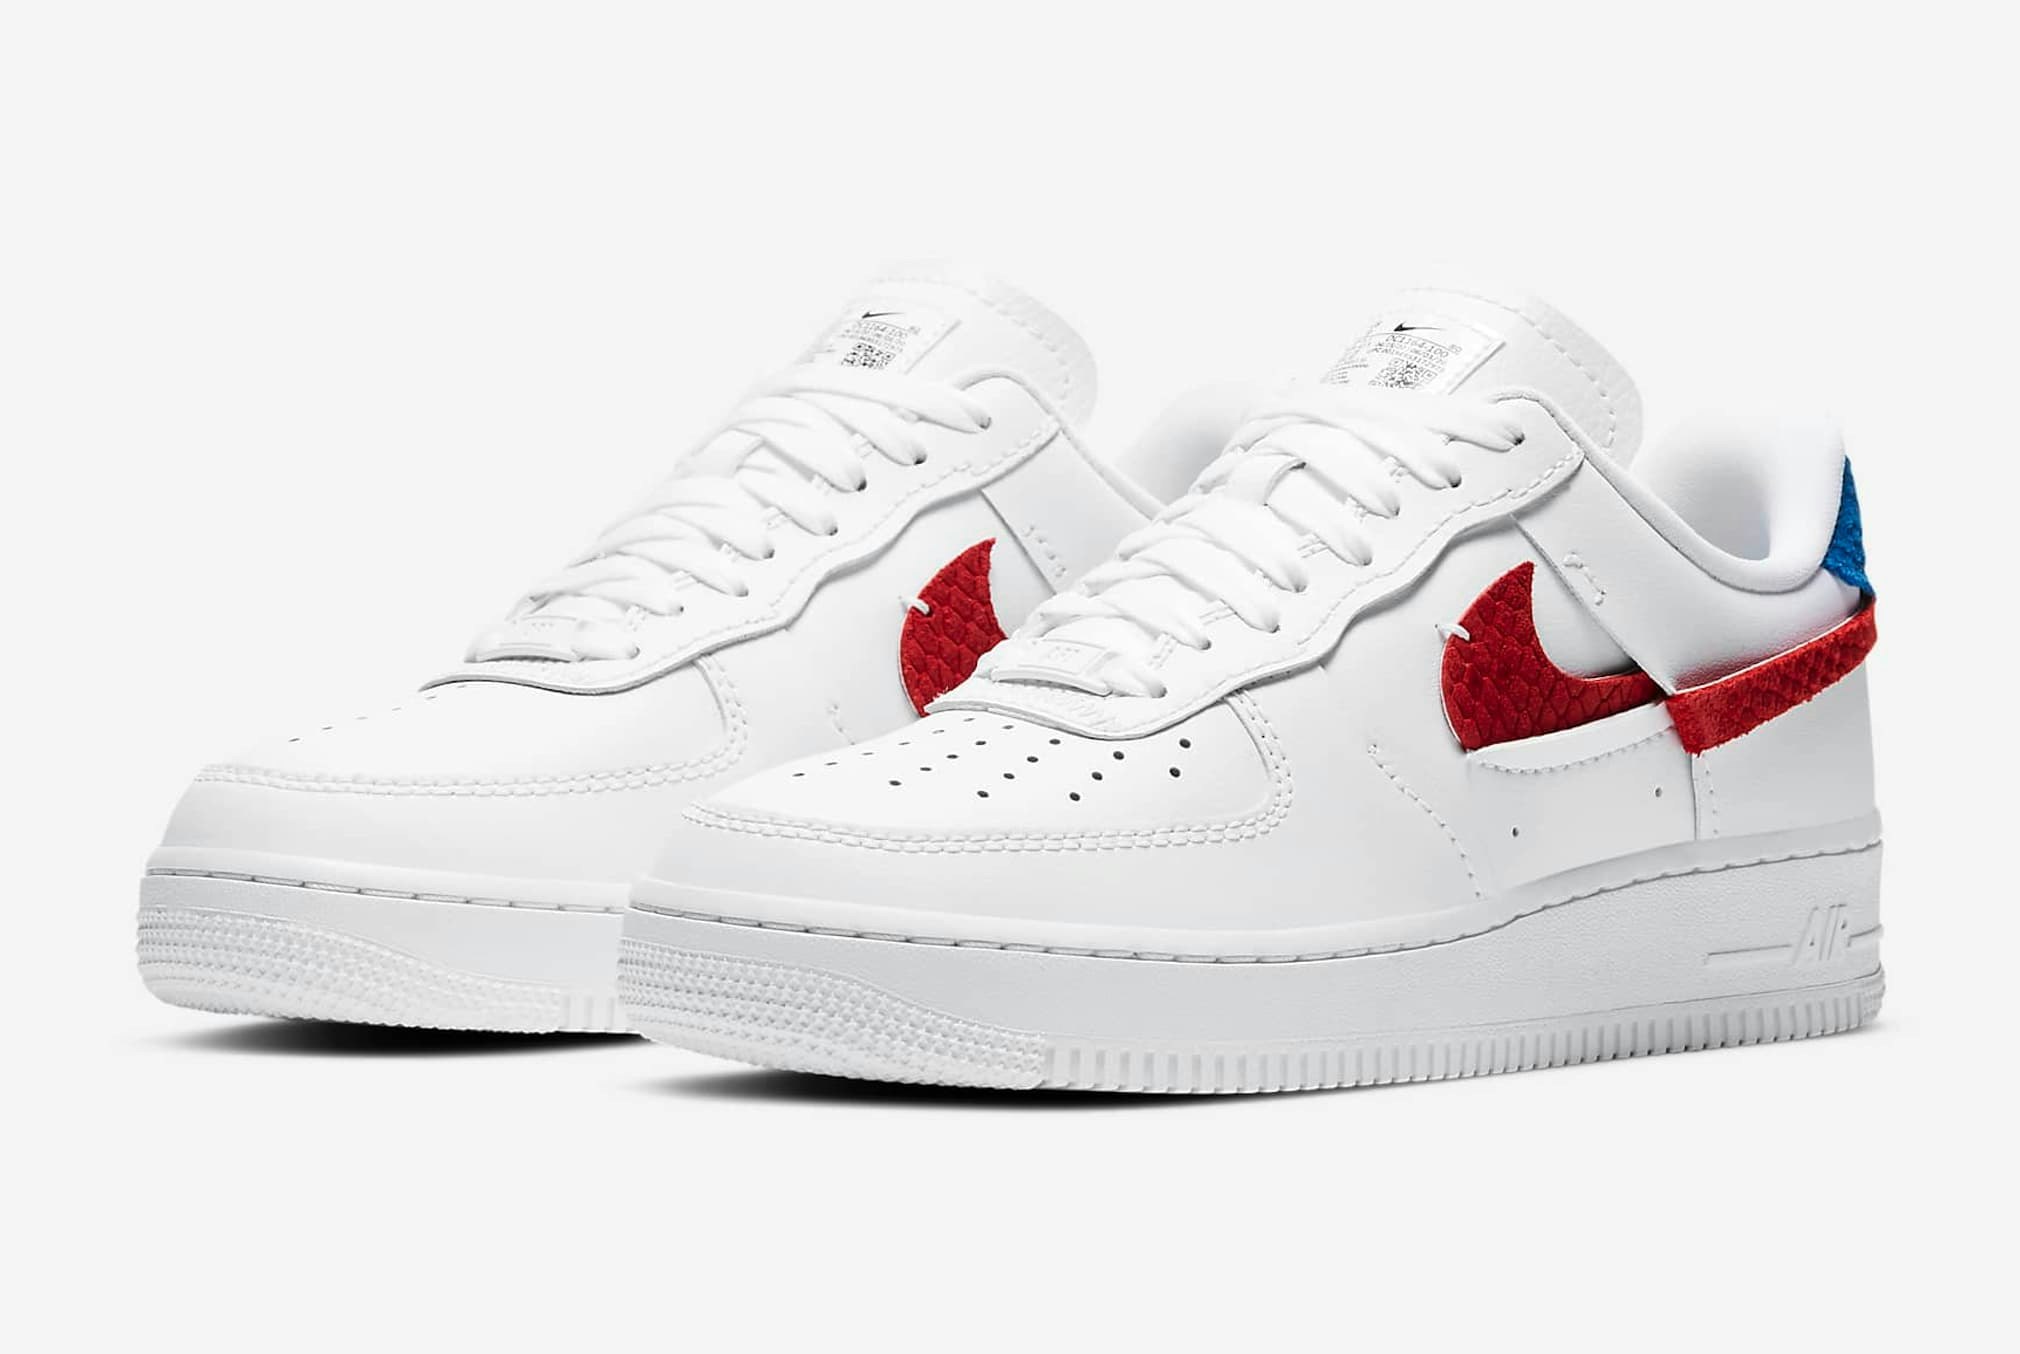 Nike Air Force 1 LXX "University Red"